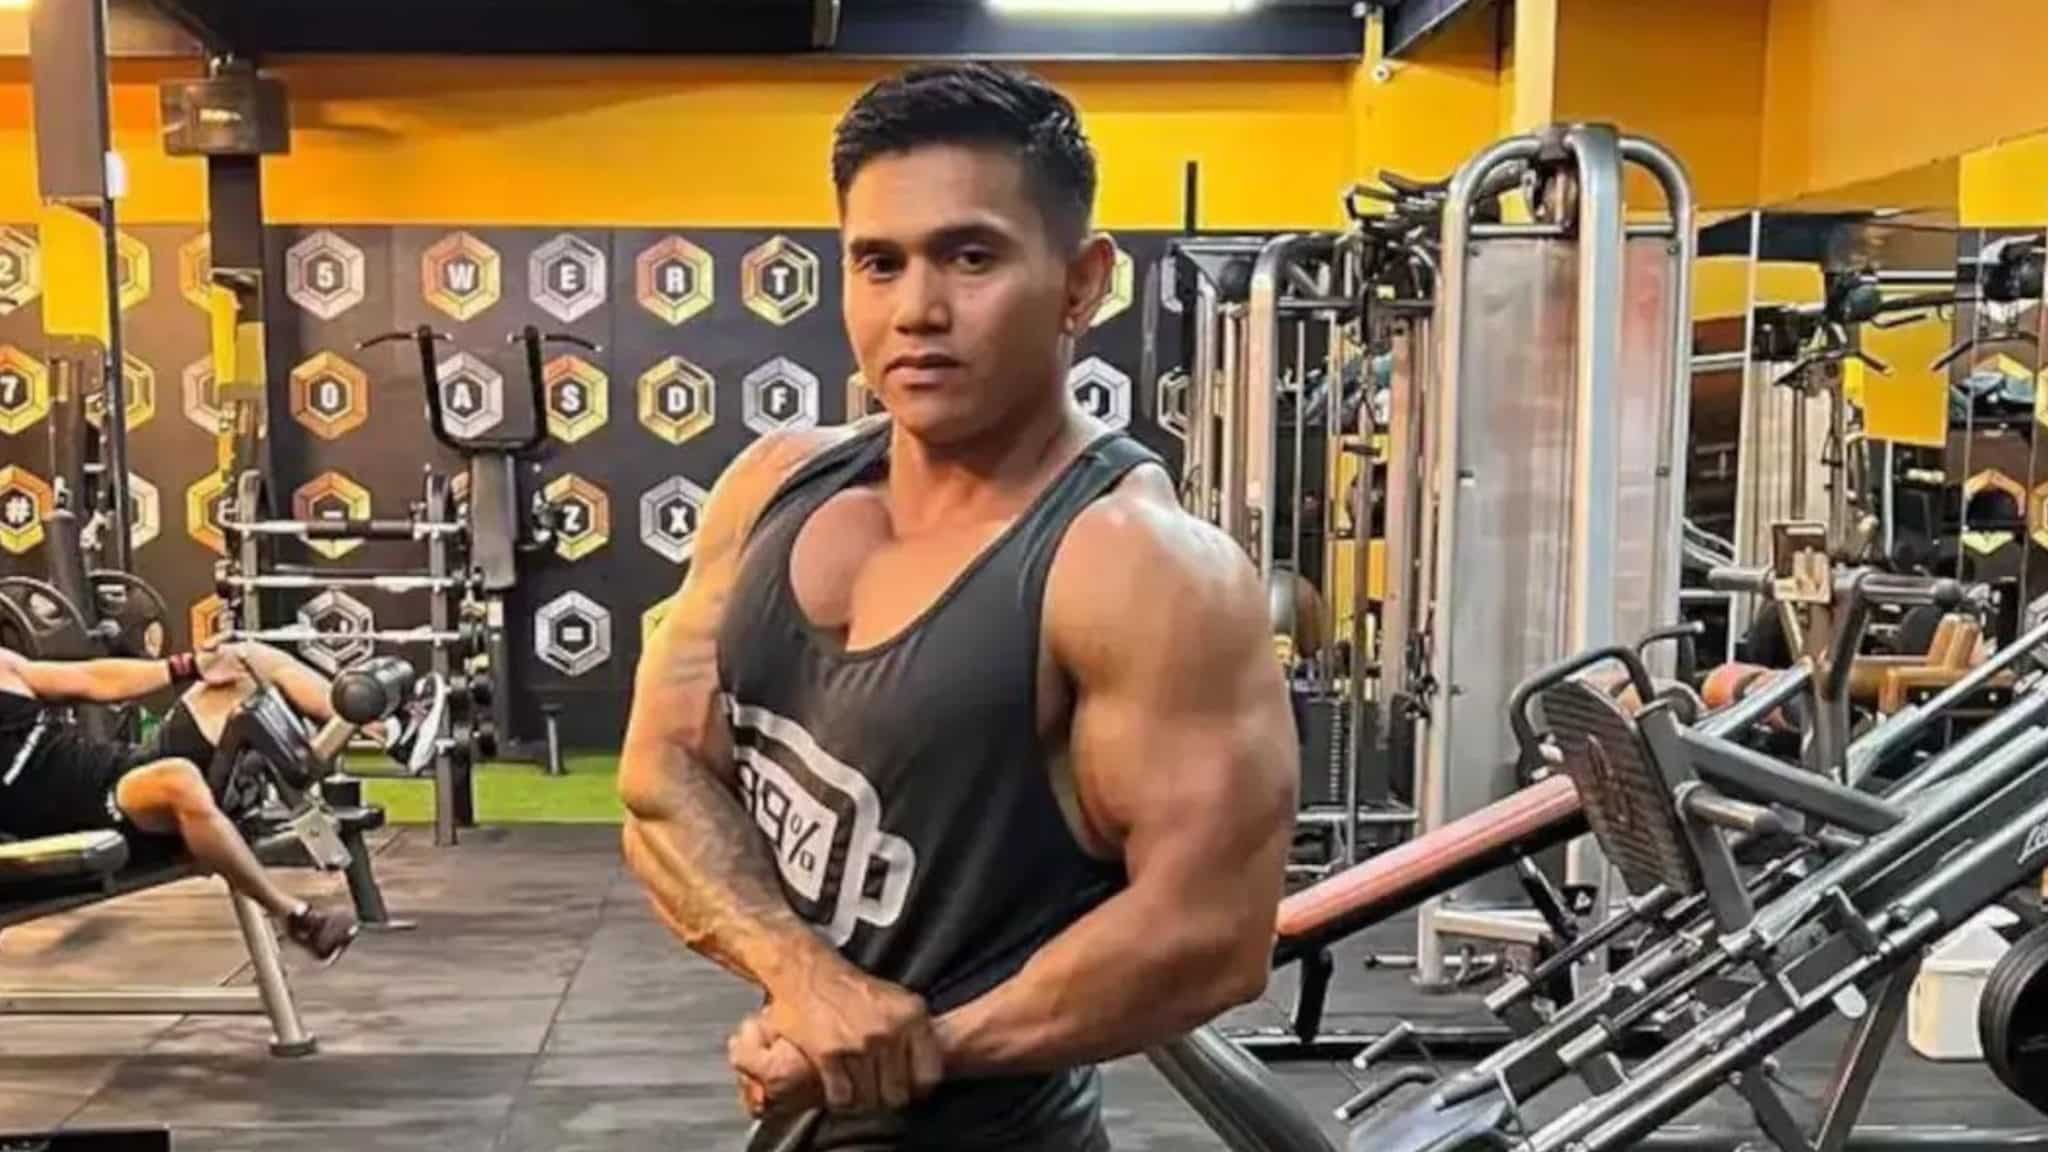 Young bodybuilder Justyn Vicky showing off his muscles in a weight room.